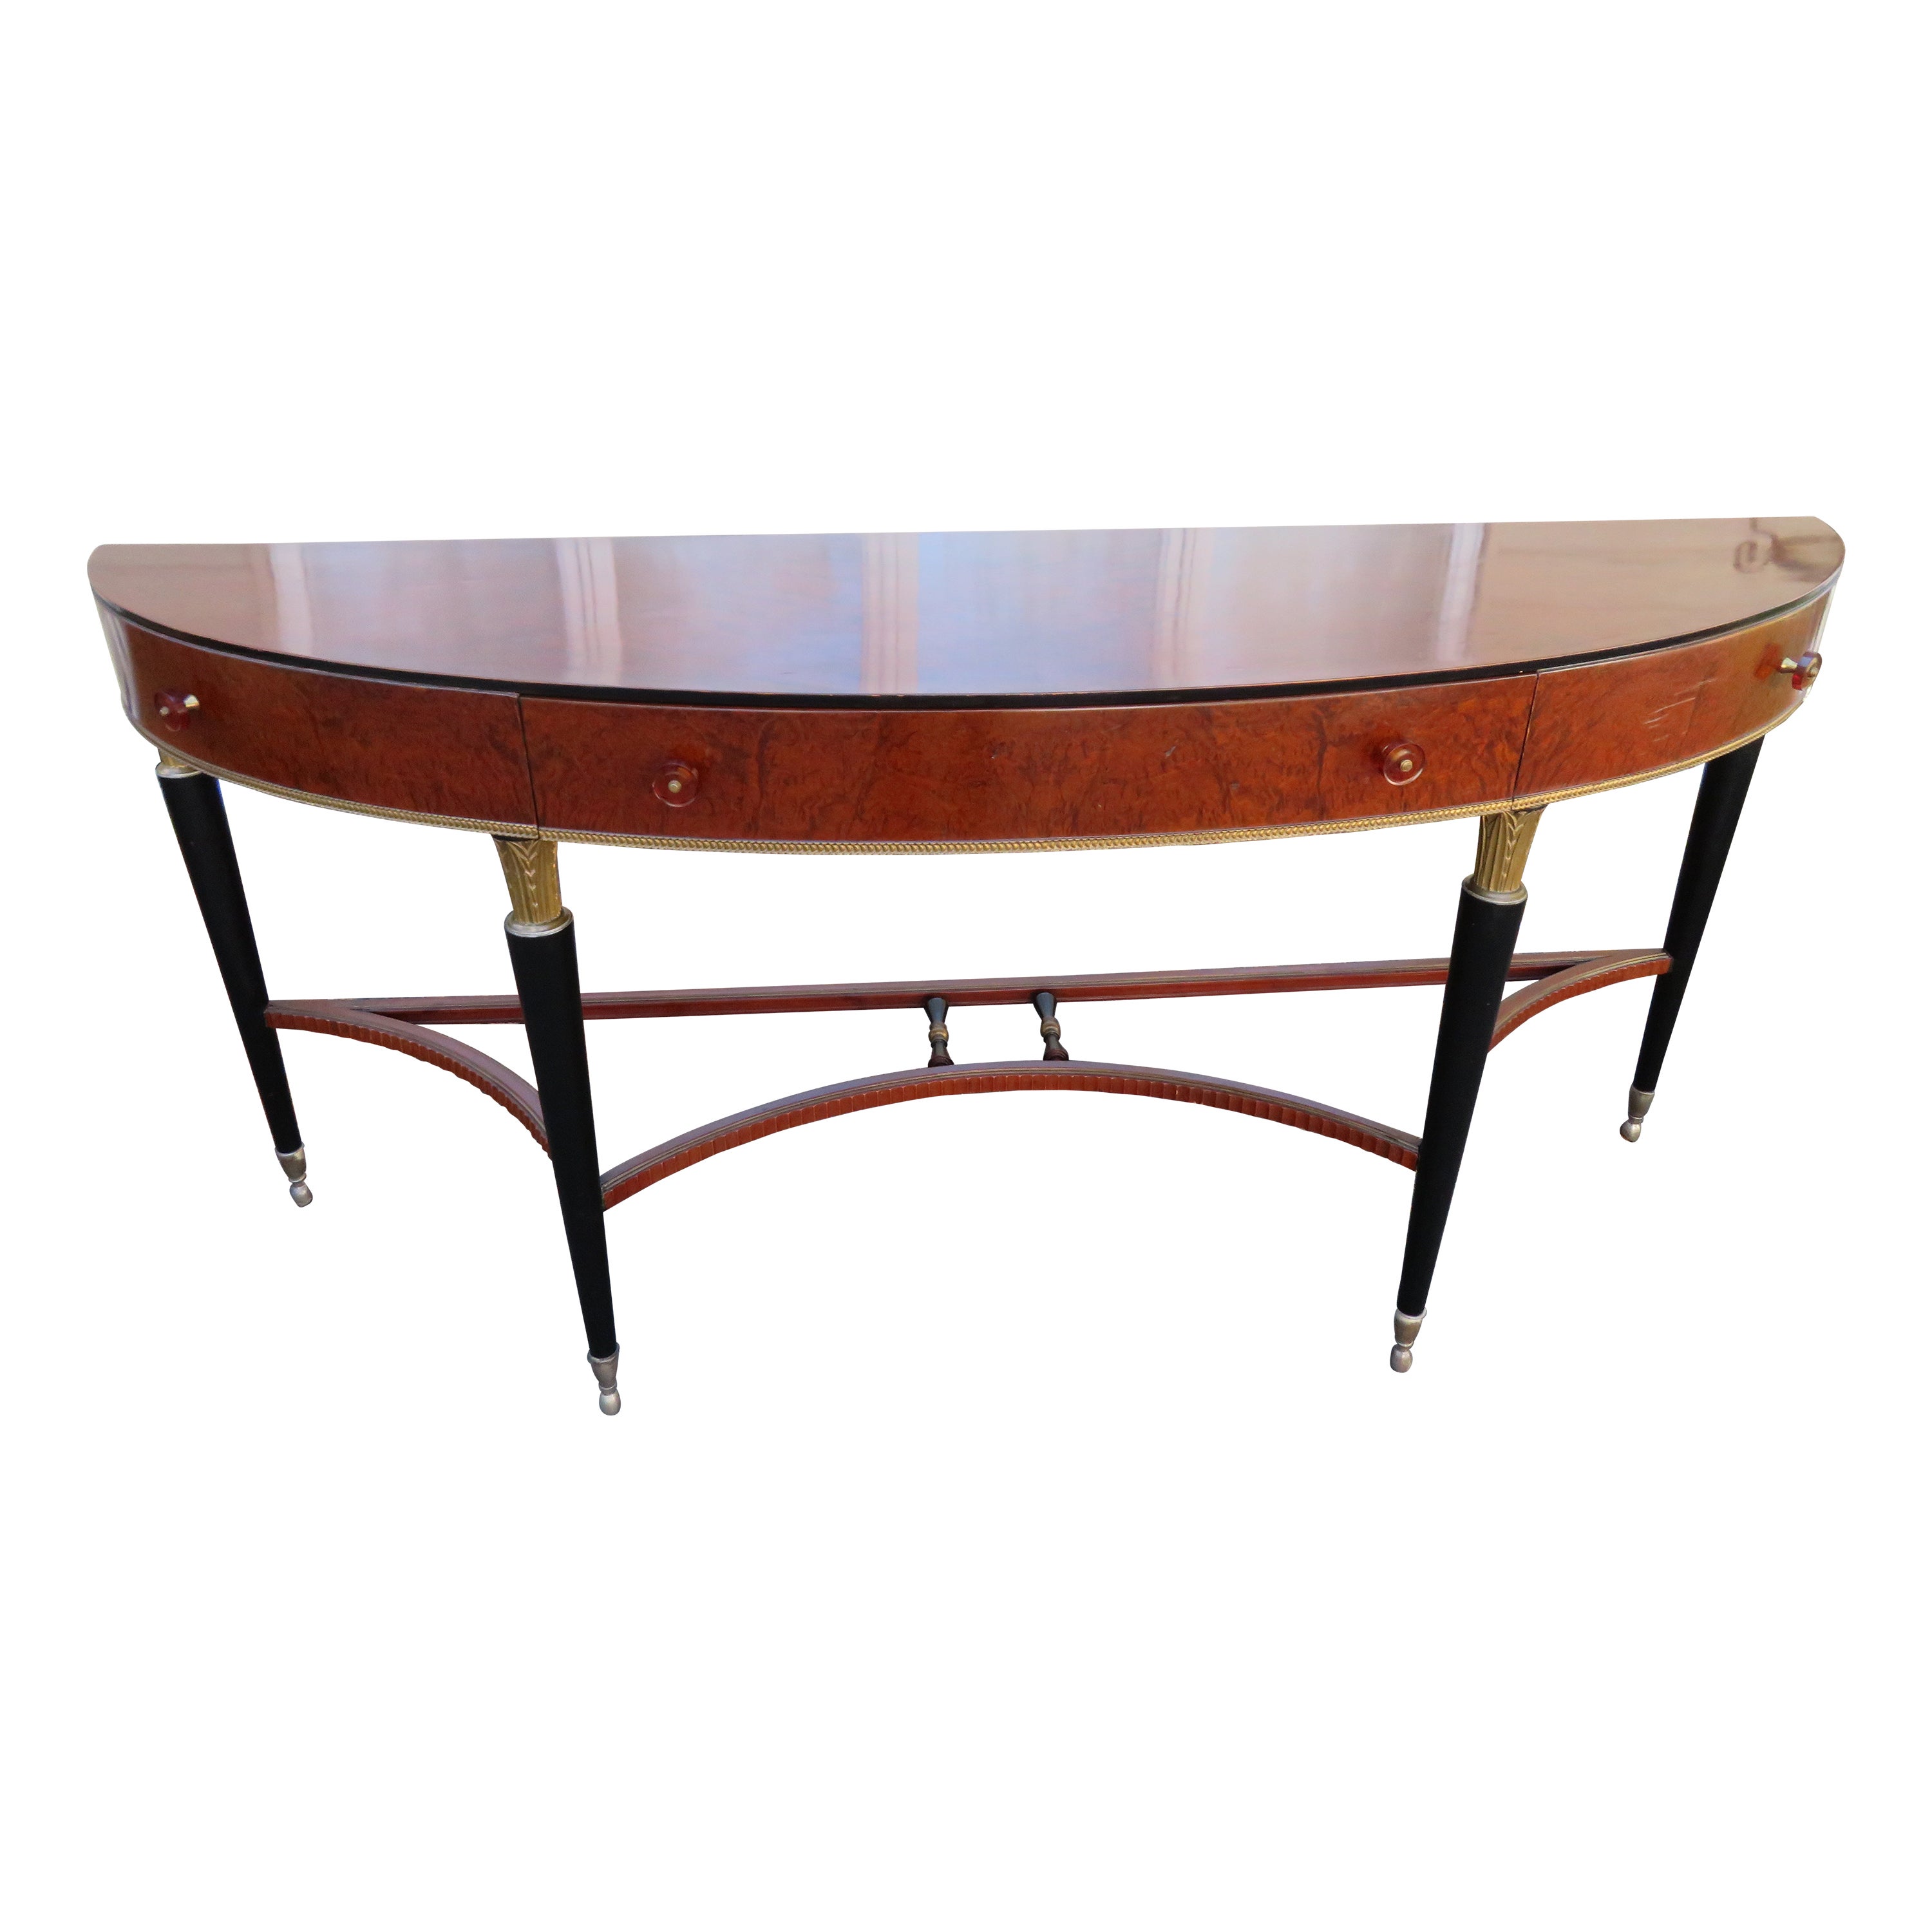 Stunning Louis XVI Style French Mahogany Demilune Console Table